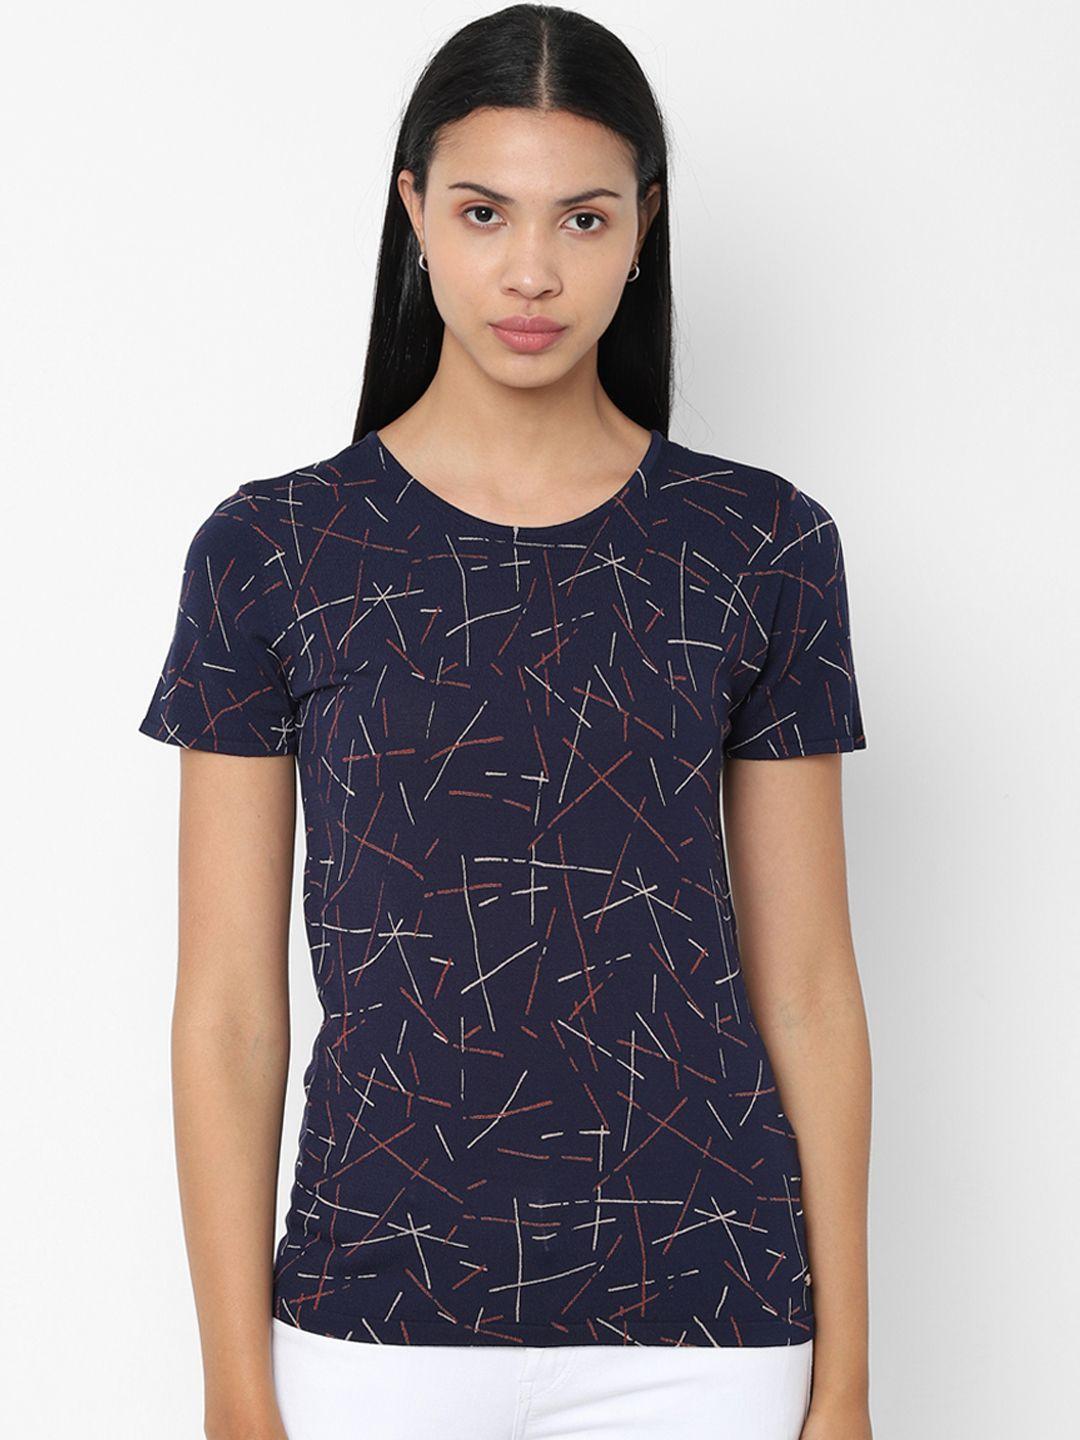 allen solly woman navy blue & brown printed round neck t-shirt